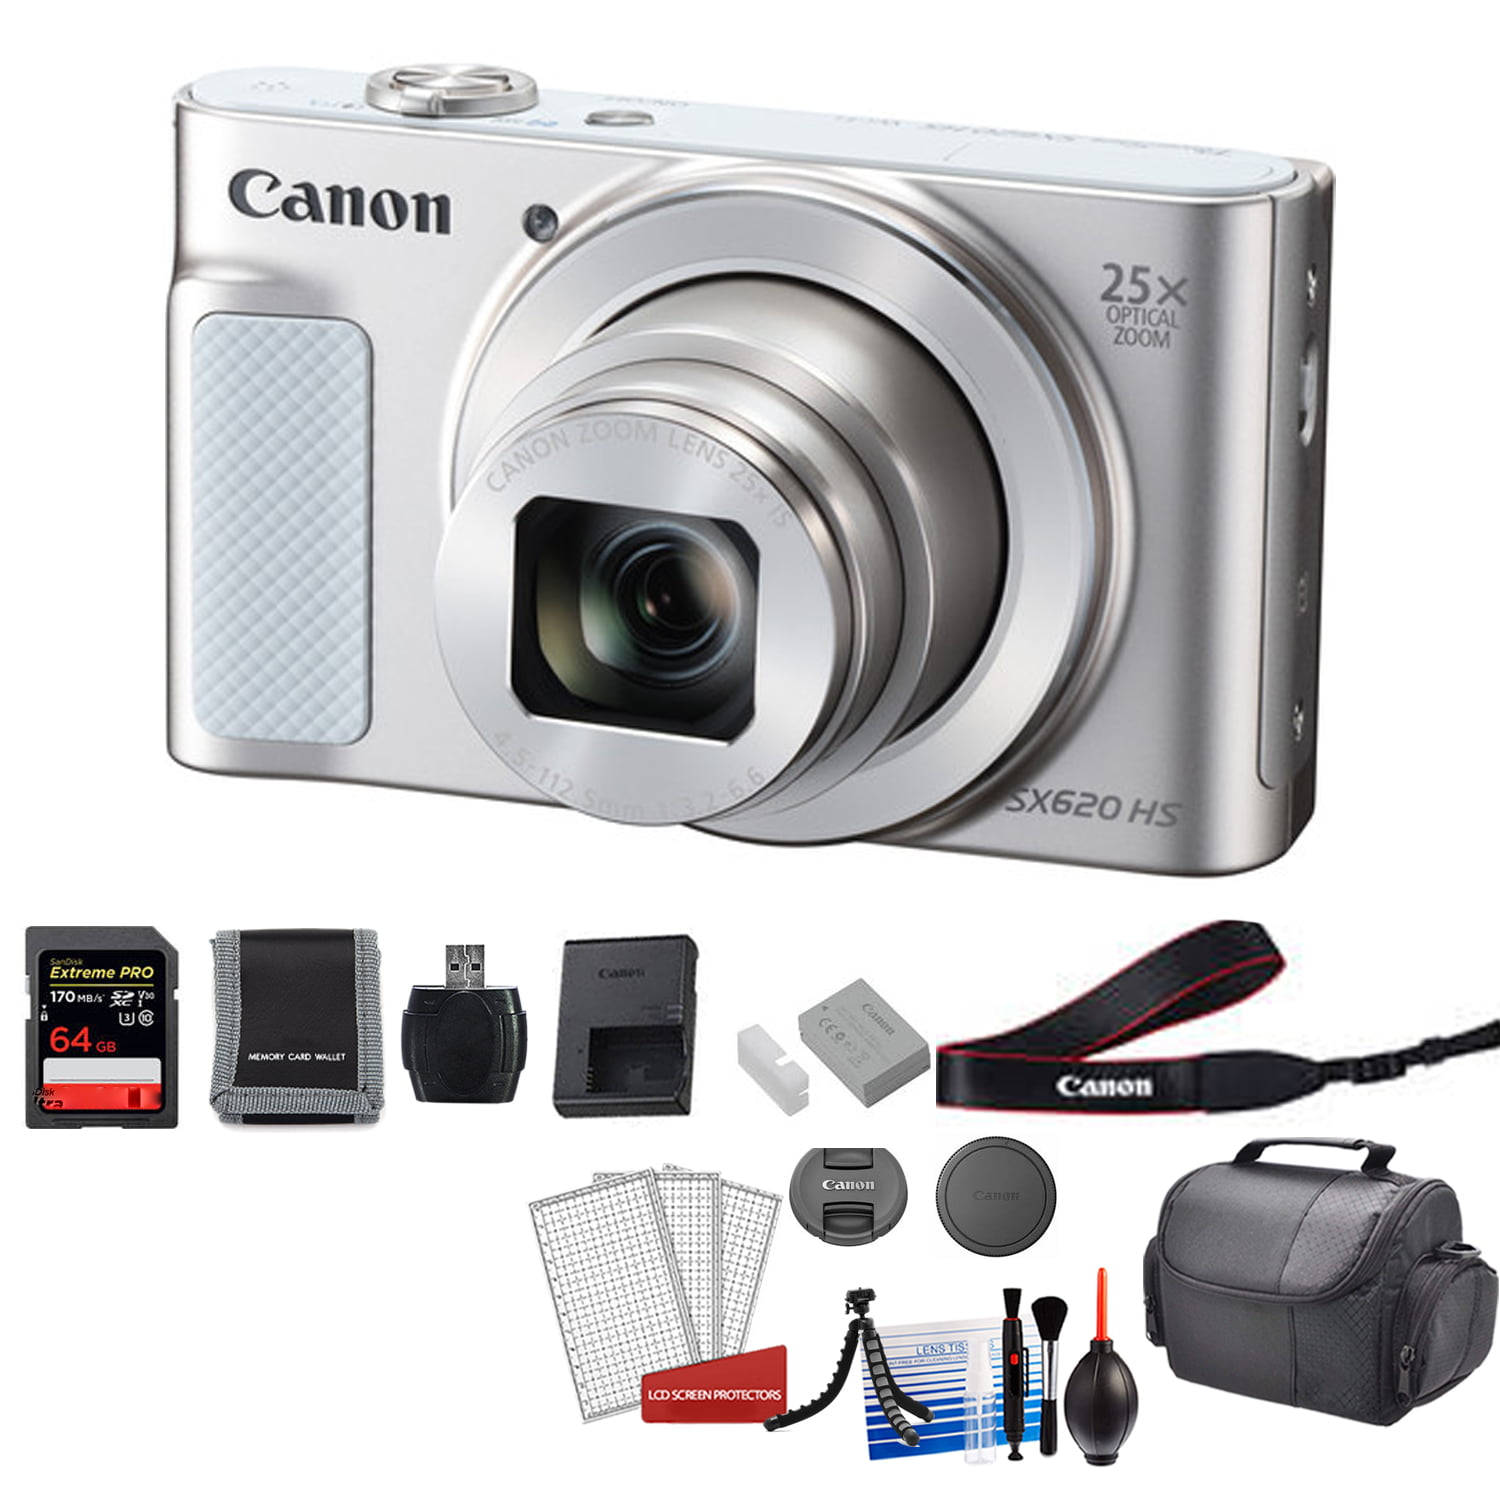 Canon PowerShot SX620 HS Digital Camera (Silver) Kit with 64GB